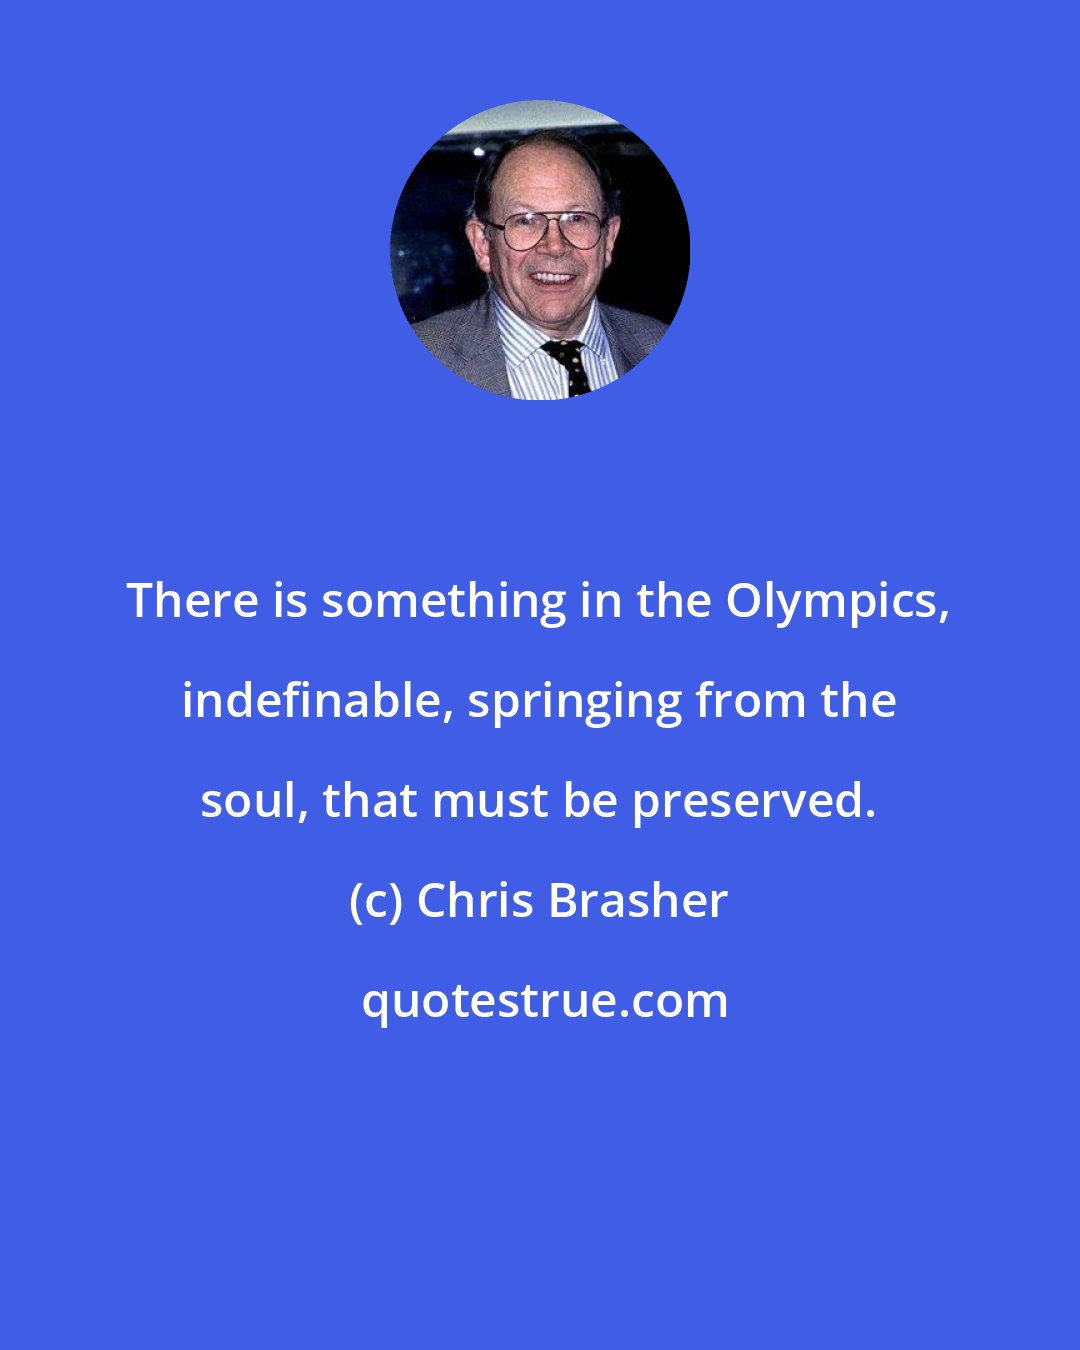 Chris Brasher: There is something in the Olympics, indefinable, springing from the soul, that must be preserved.